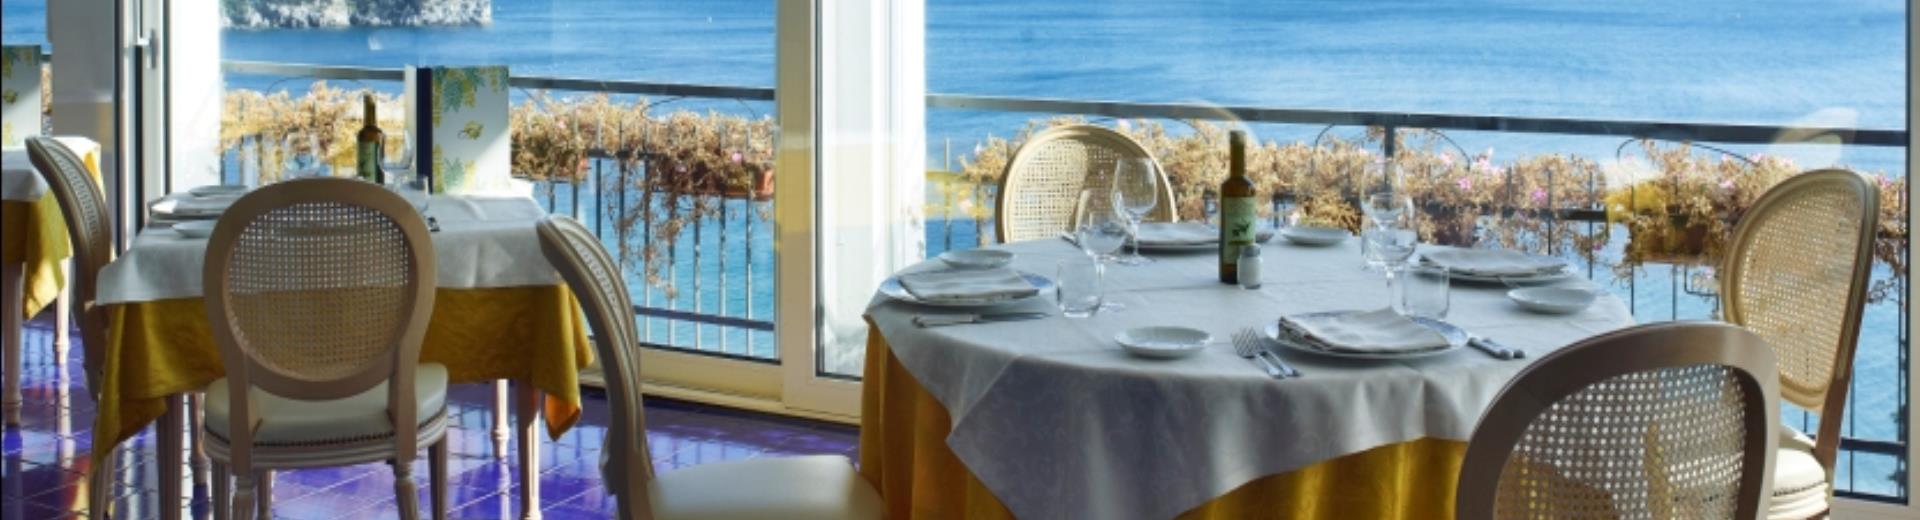 Restaurant with views on the Spotorno sea . Come and enjoy Ligurian specialities.